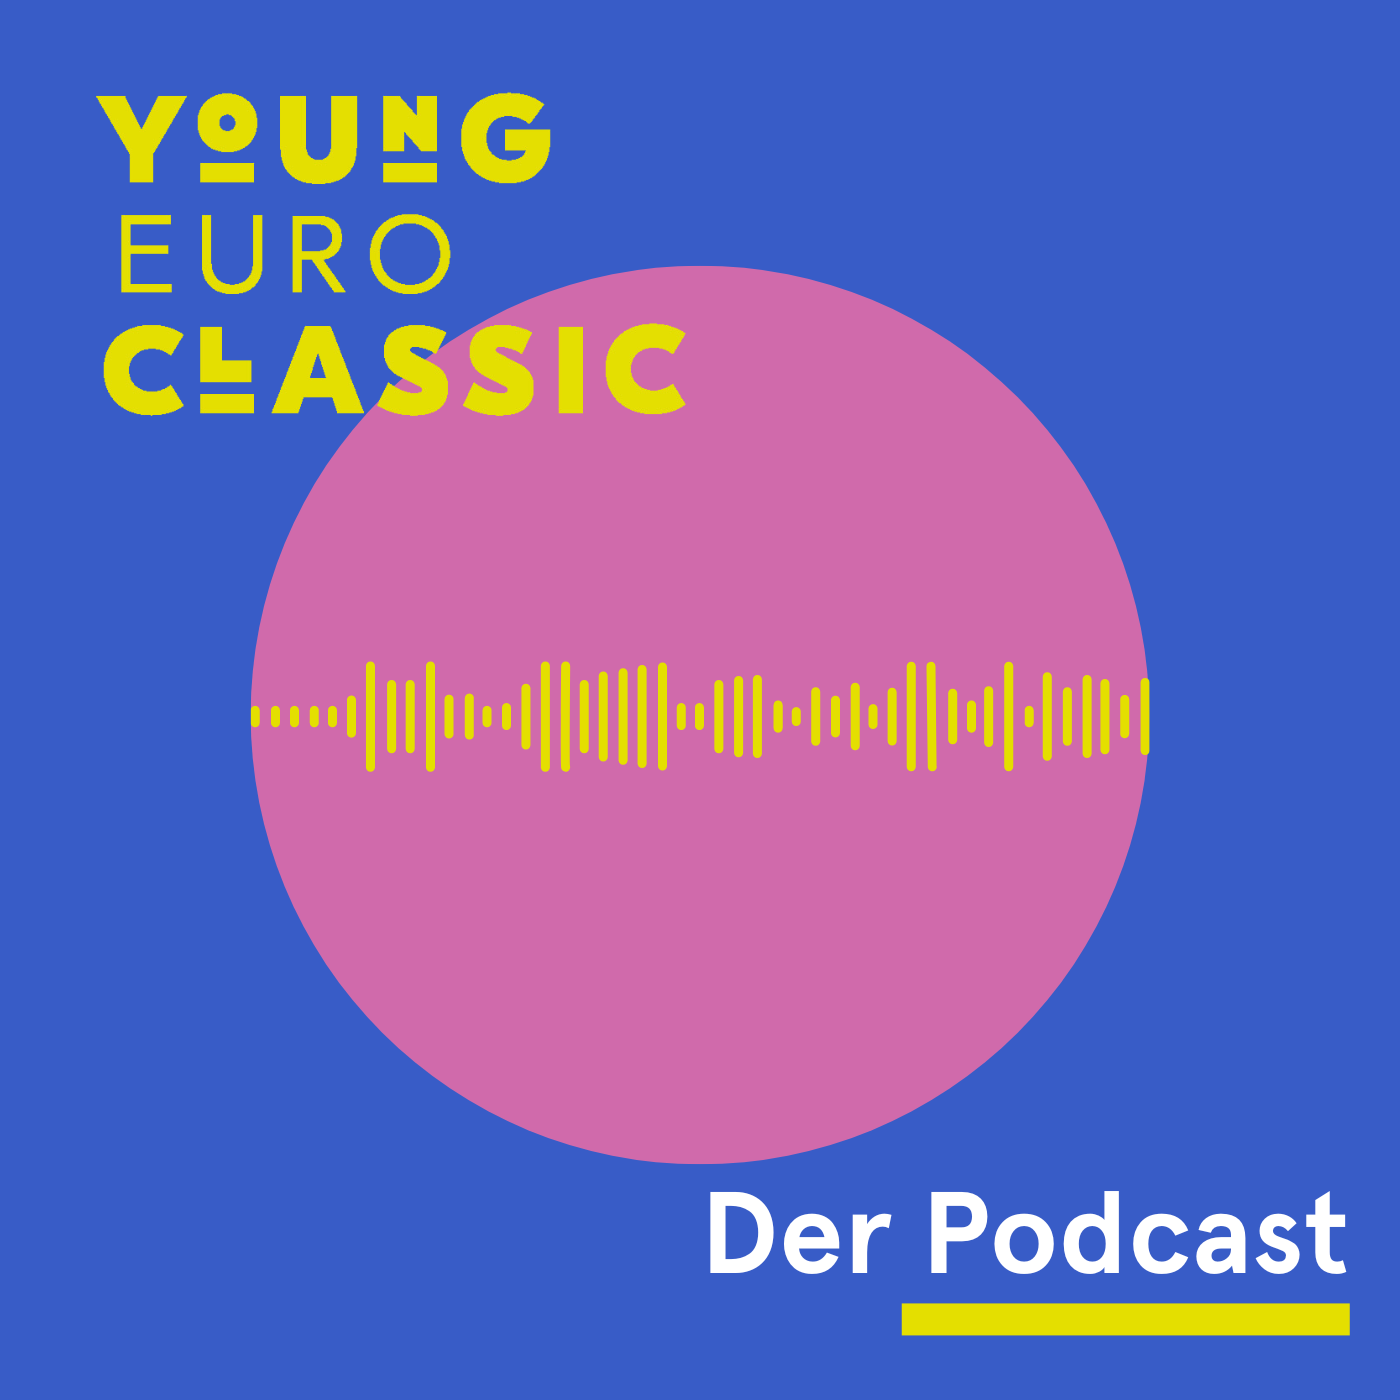 Young Euro Classic. Der Podcast